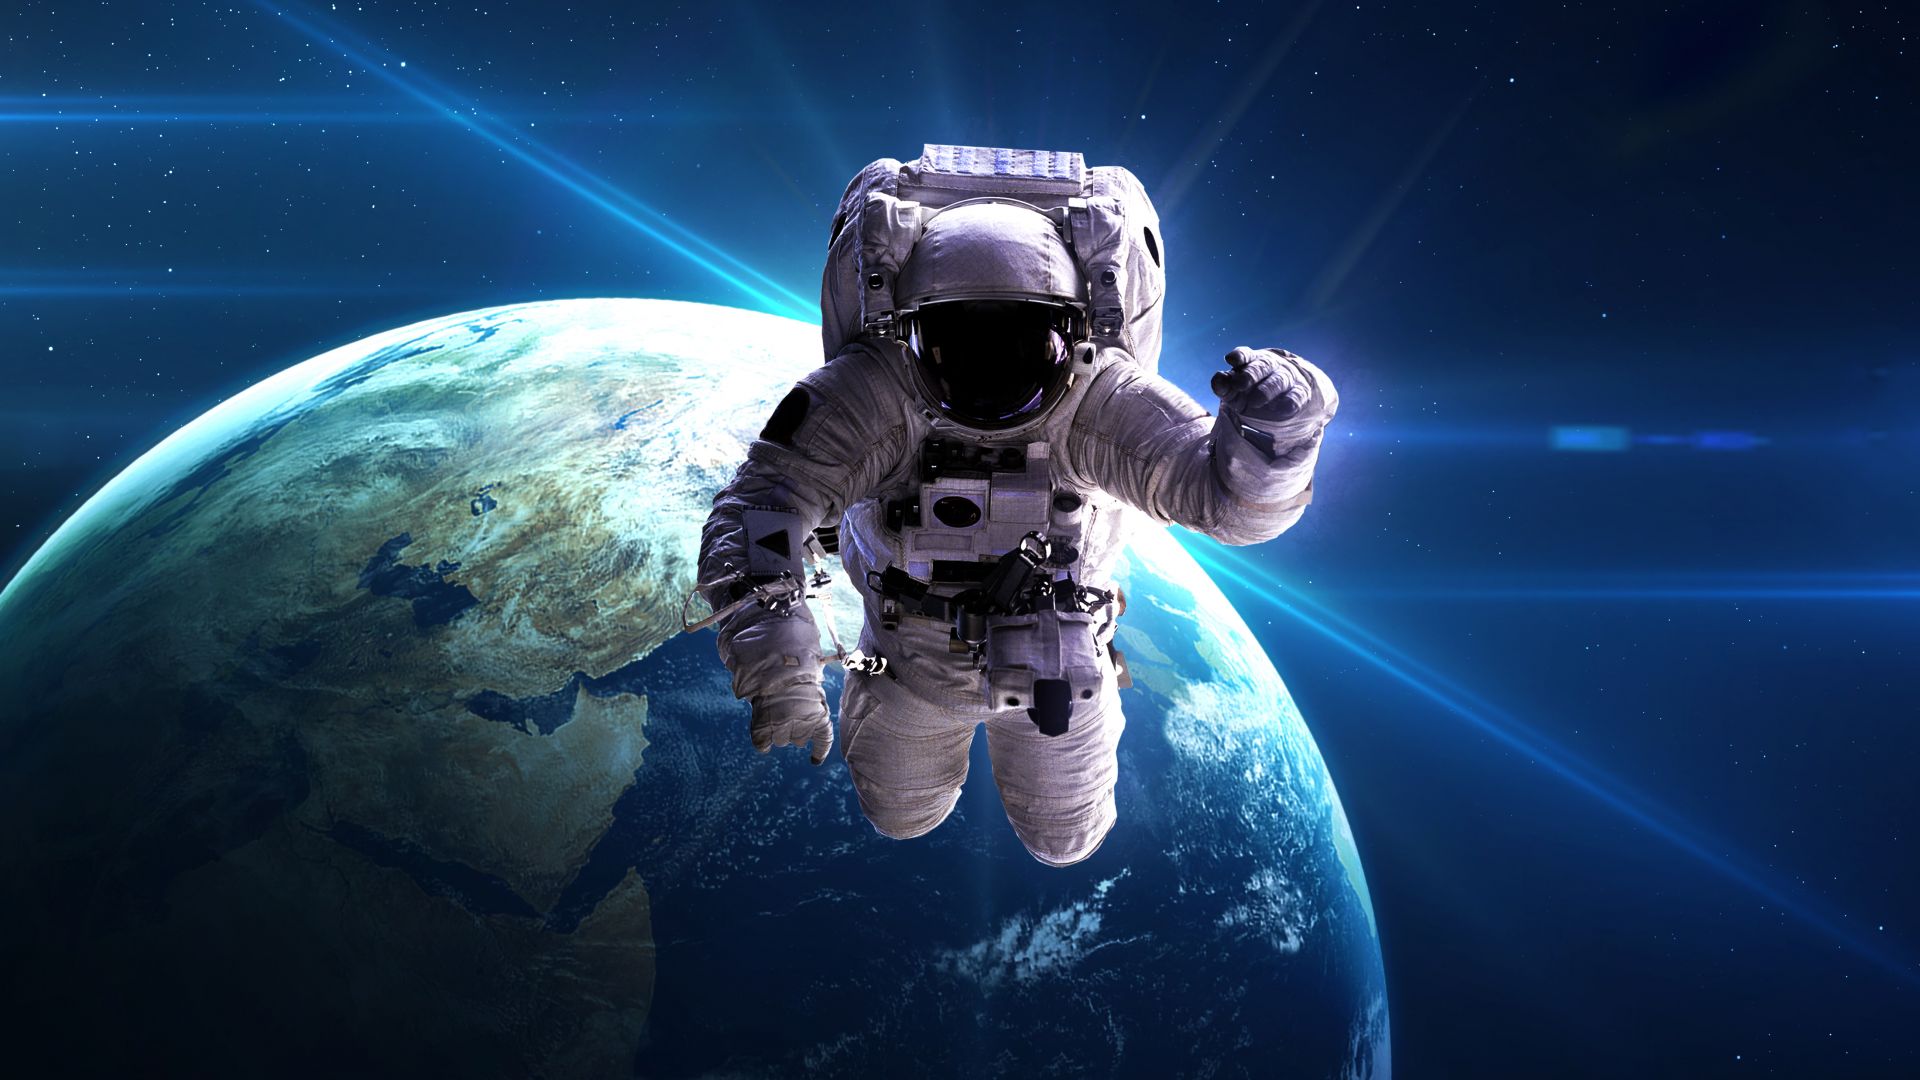 Desktop Wallpaper Astronaut, Space, Earth, Planet, Hd Image, Picture,  Background, F4cede